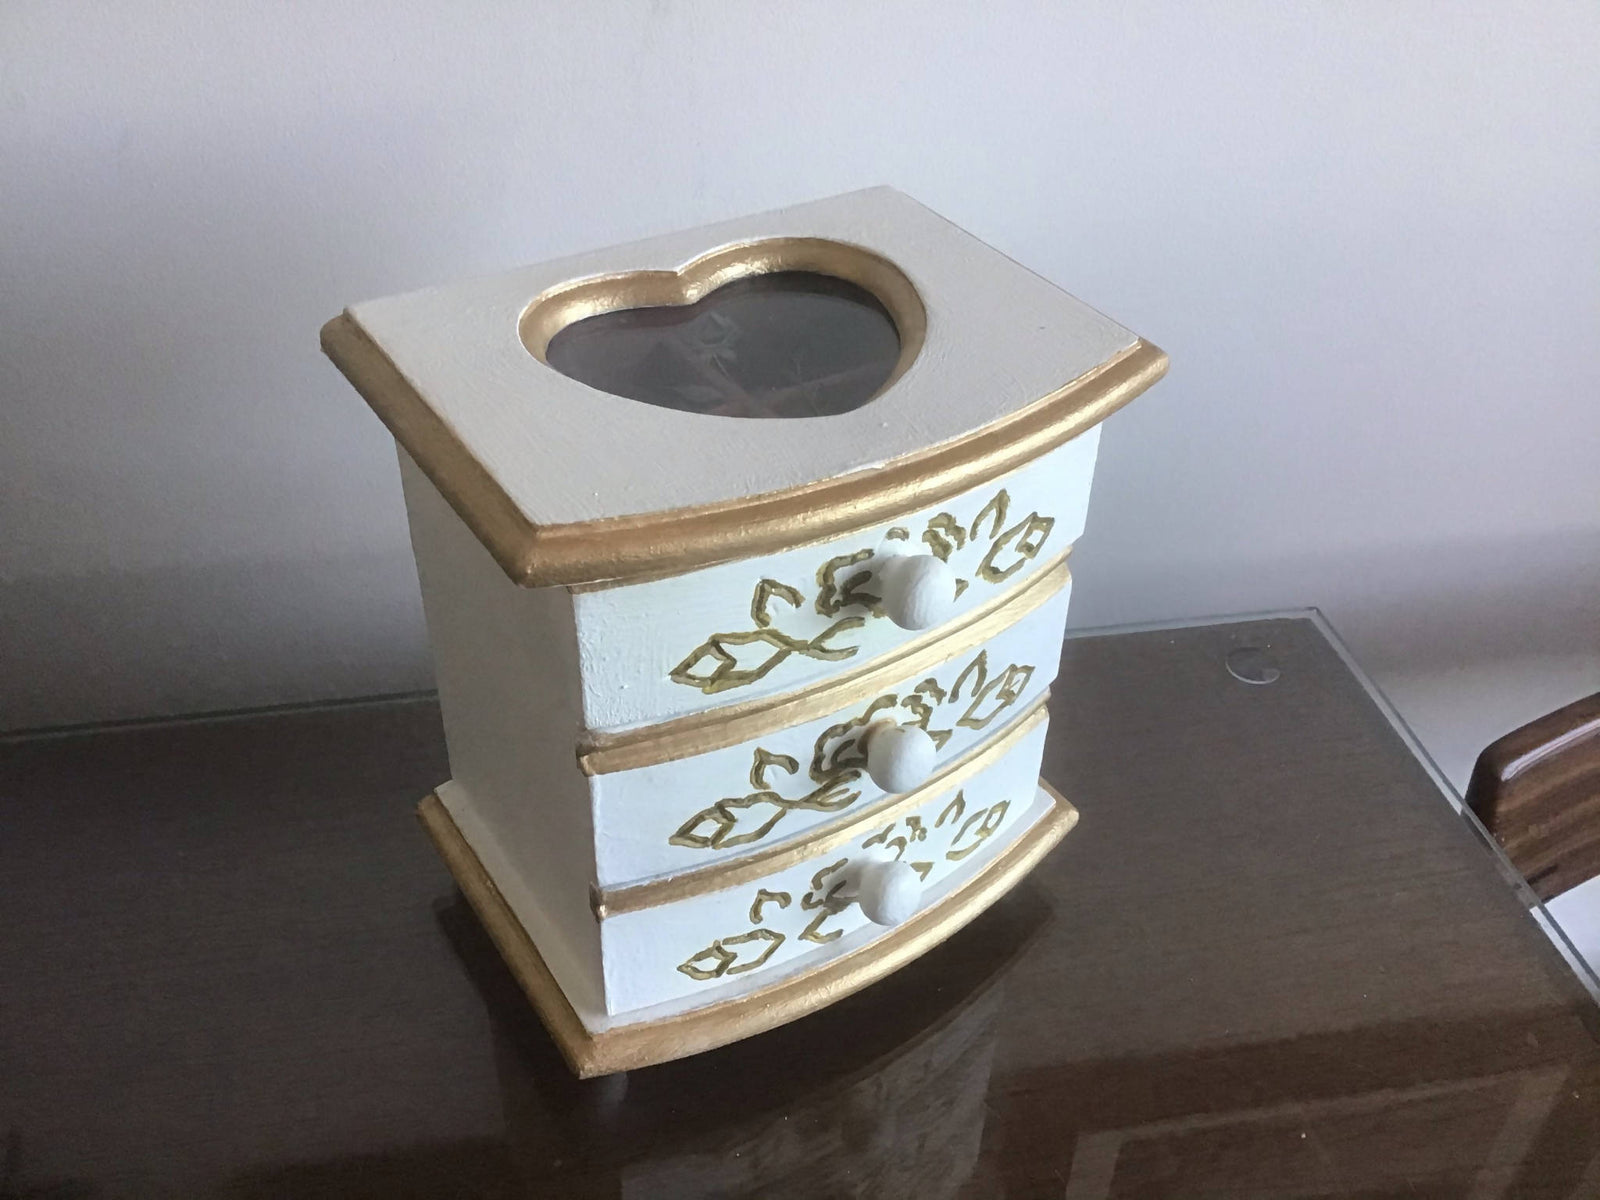 Unique hand painted jewellery box, Upcycled jewelry box, small cottage -  Ottawa Artisans